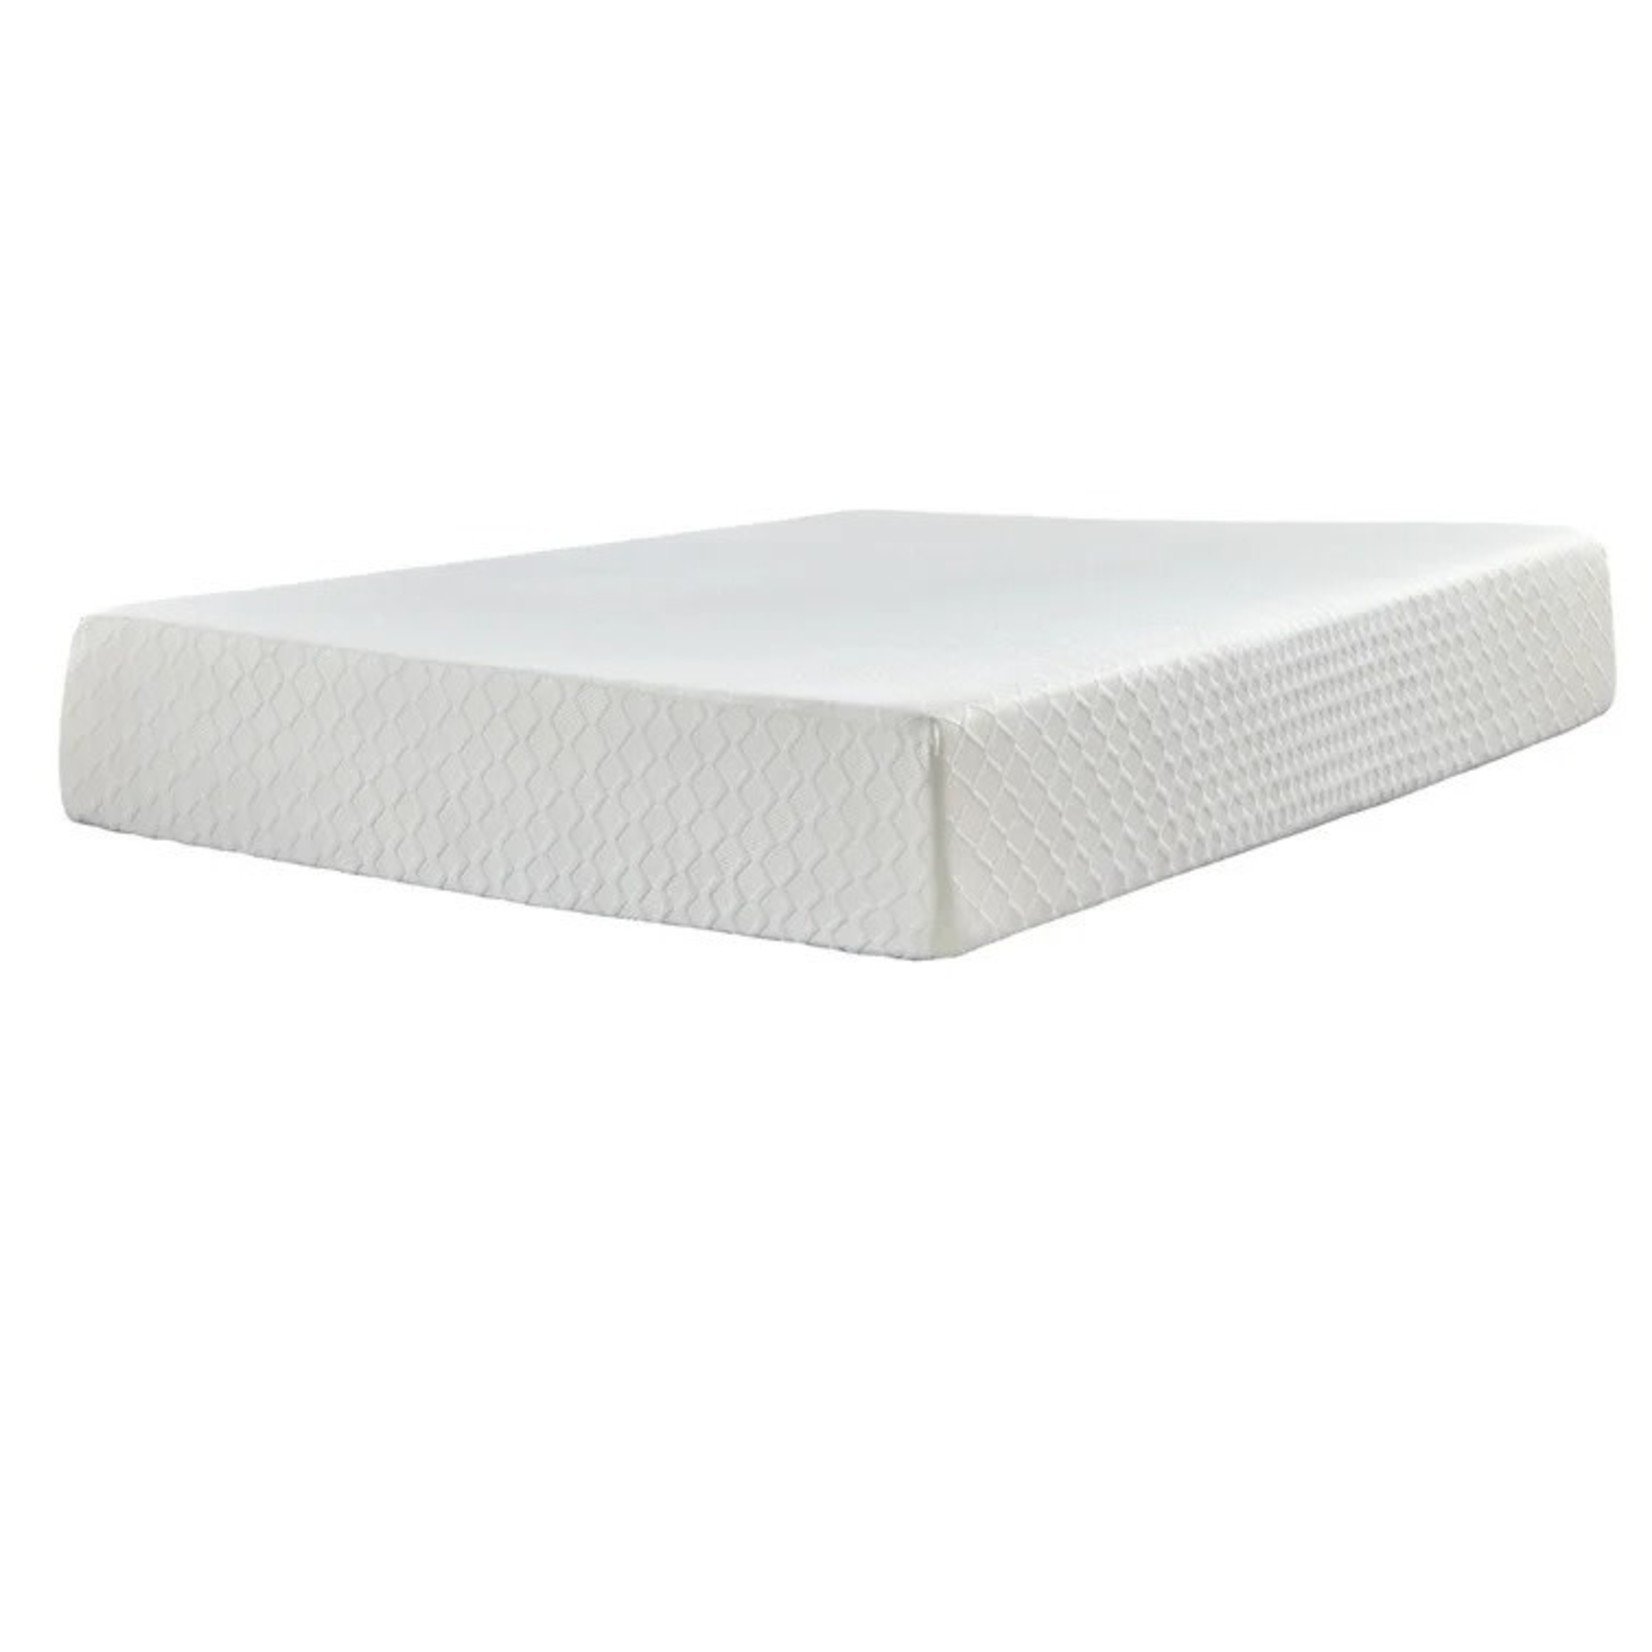 *CalKing -Signature Design by Ashley Chime 12 Inch Memory Foam - Final Sale